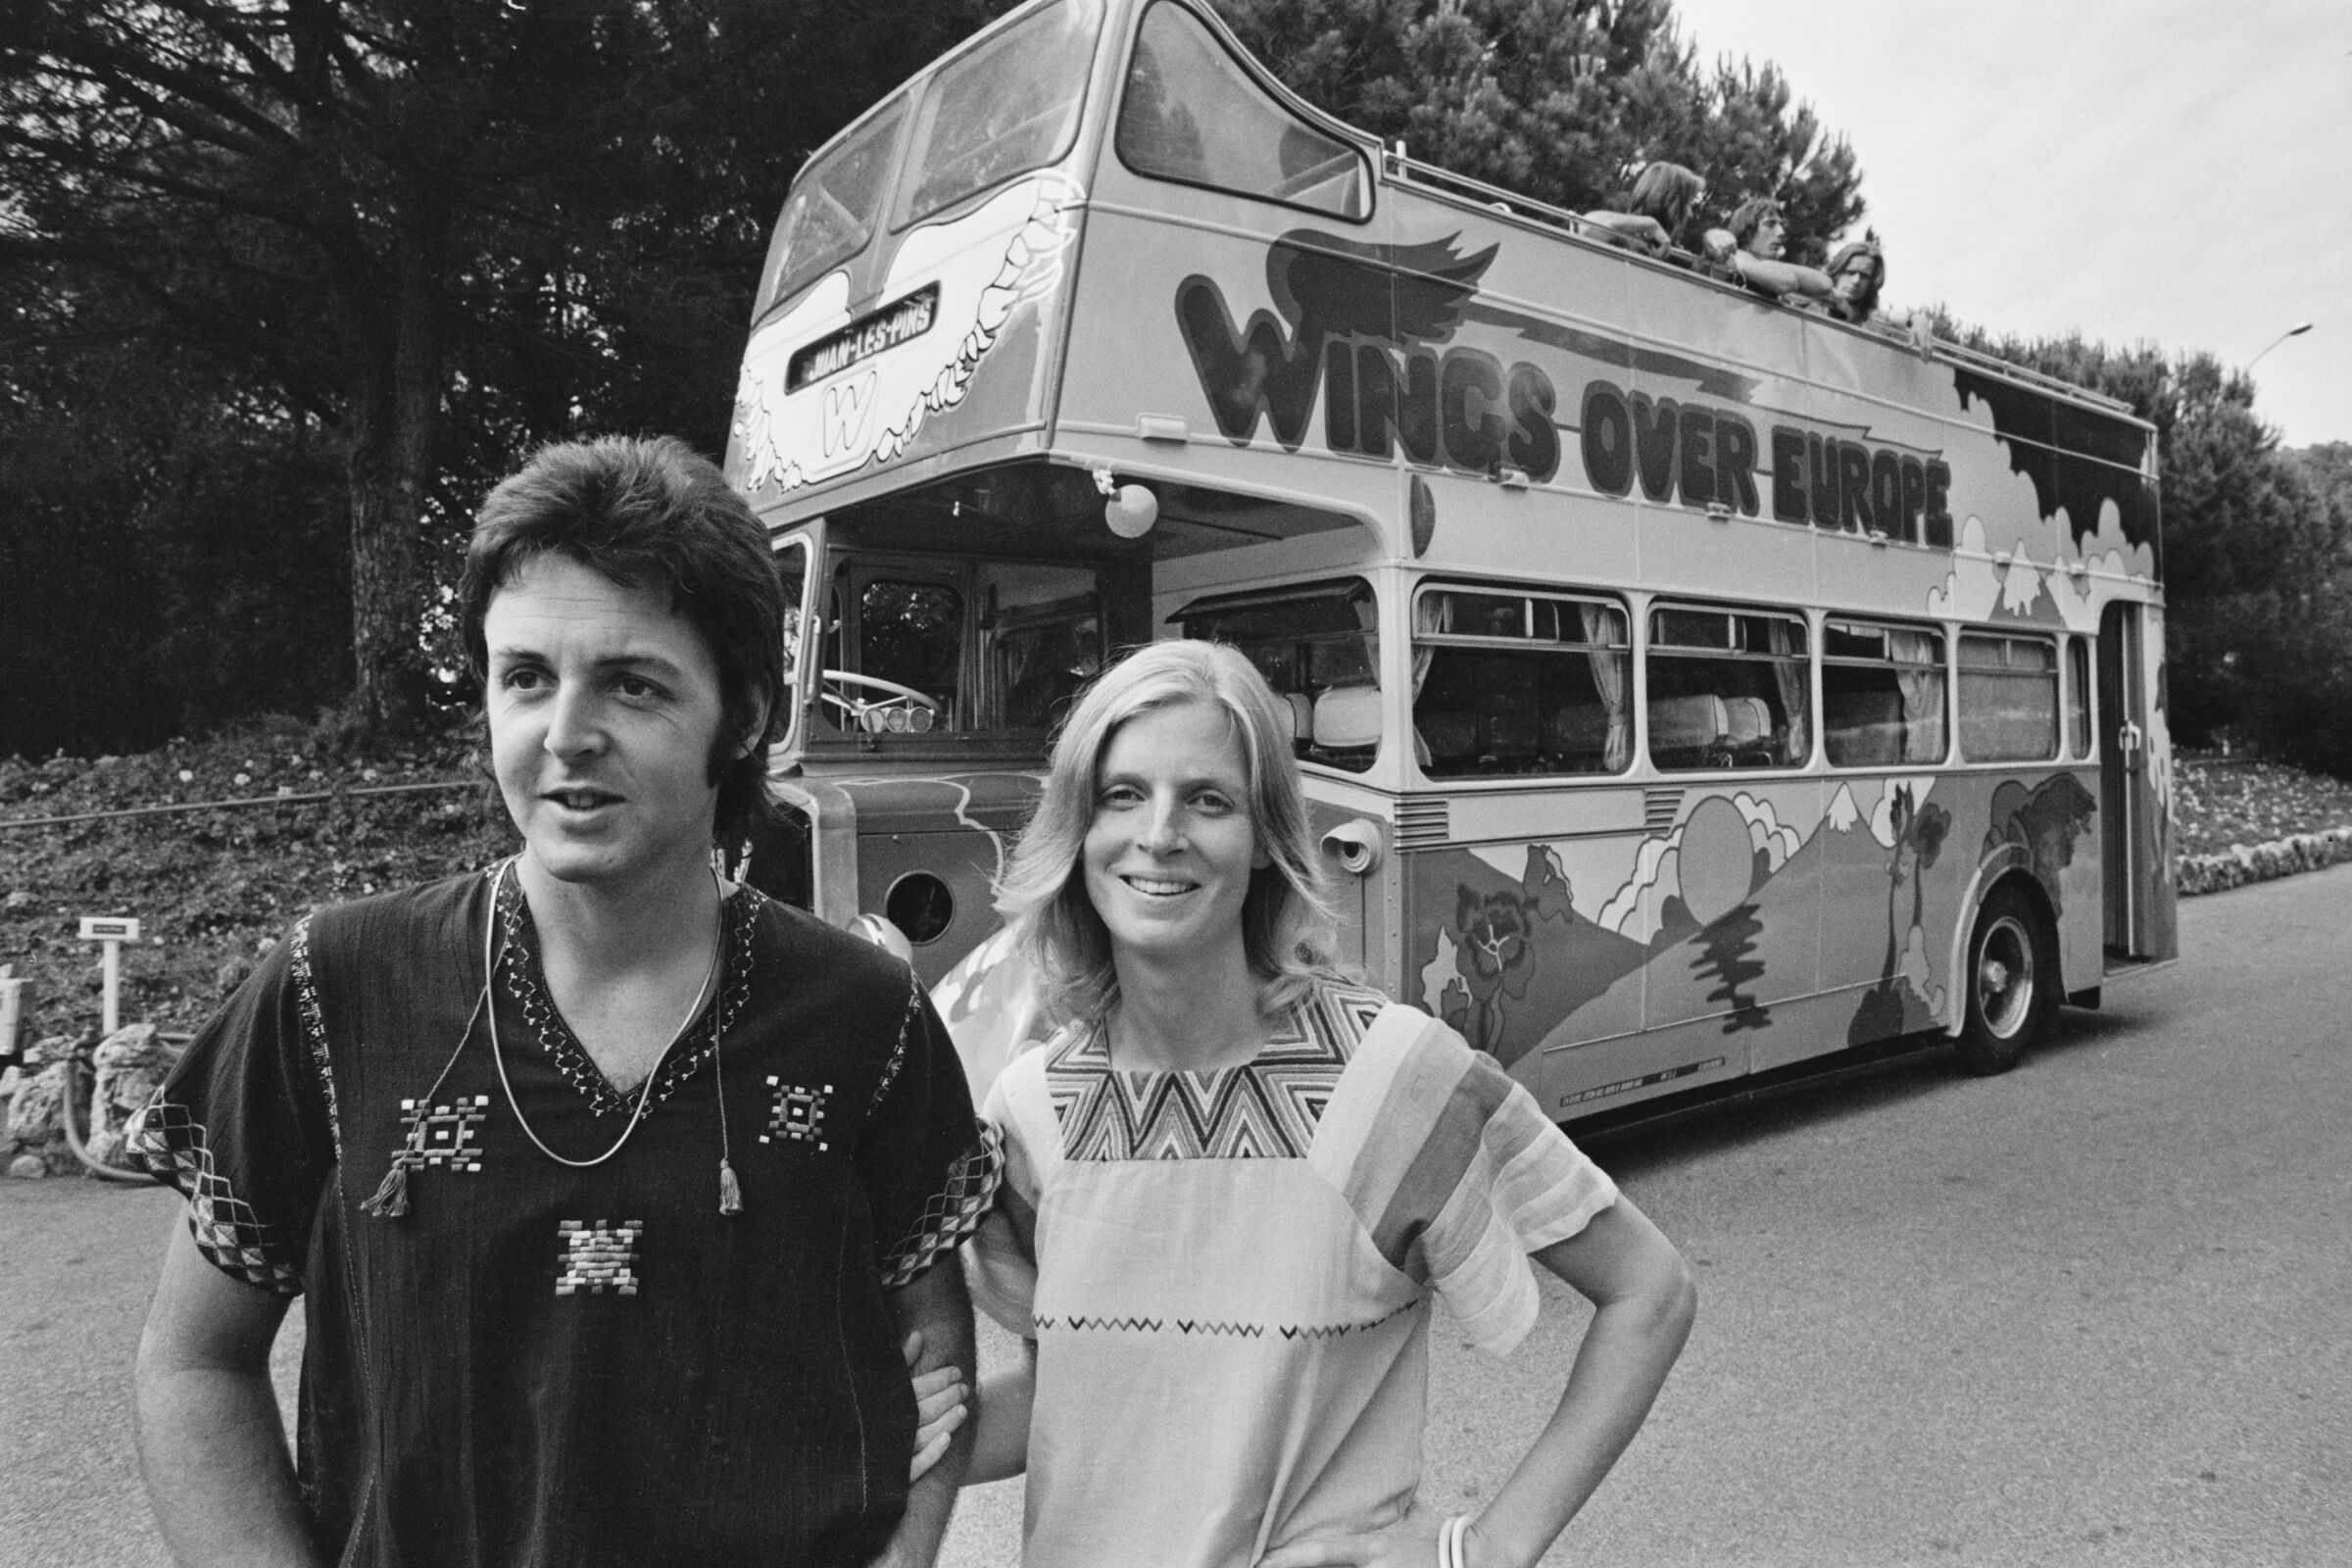 Paul and Linda McCartney, in embroidered shirts, stand in front of a bus that says "Wings over Europe."